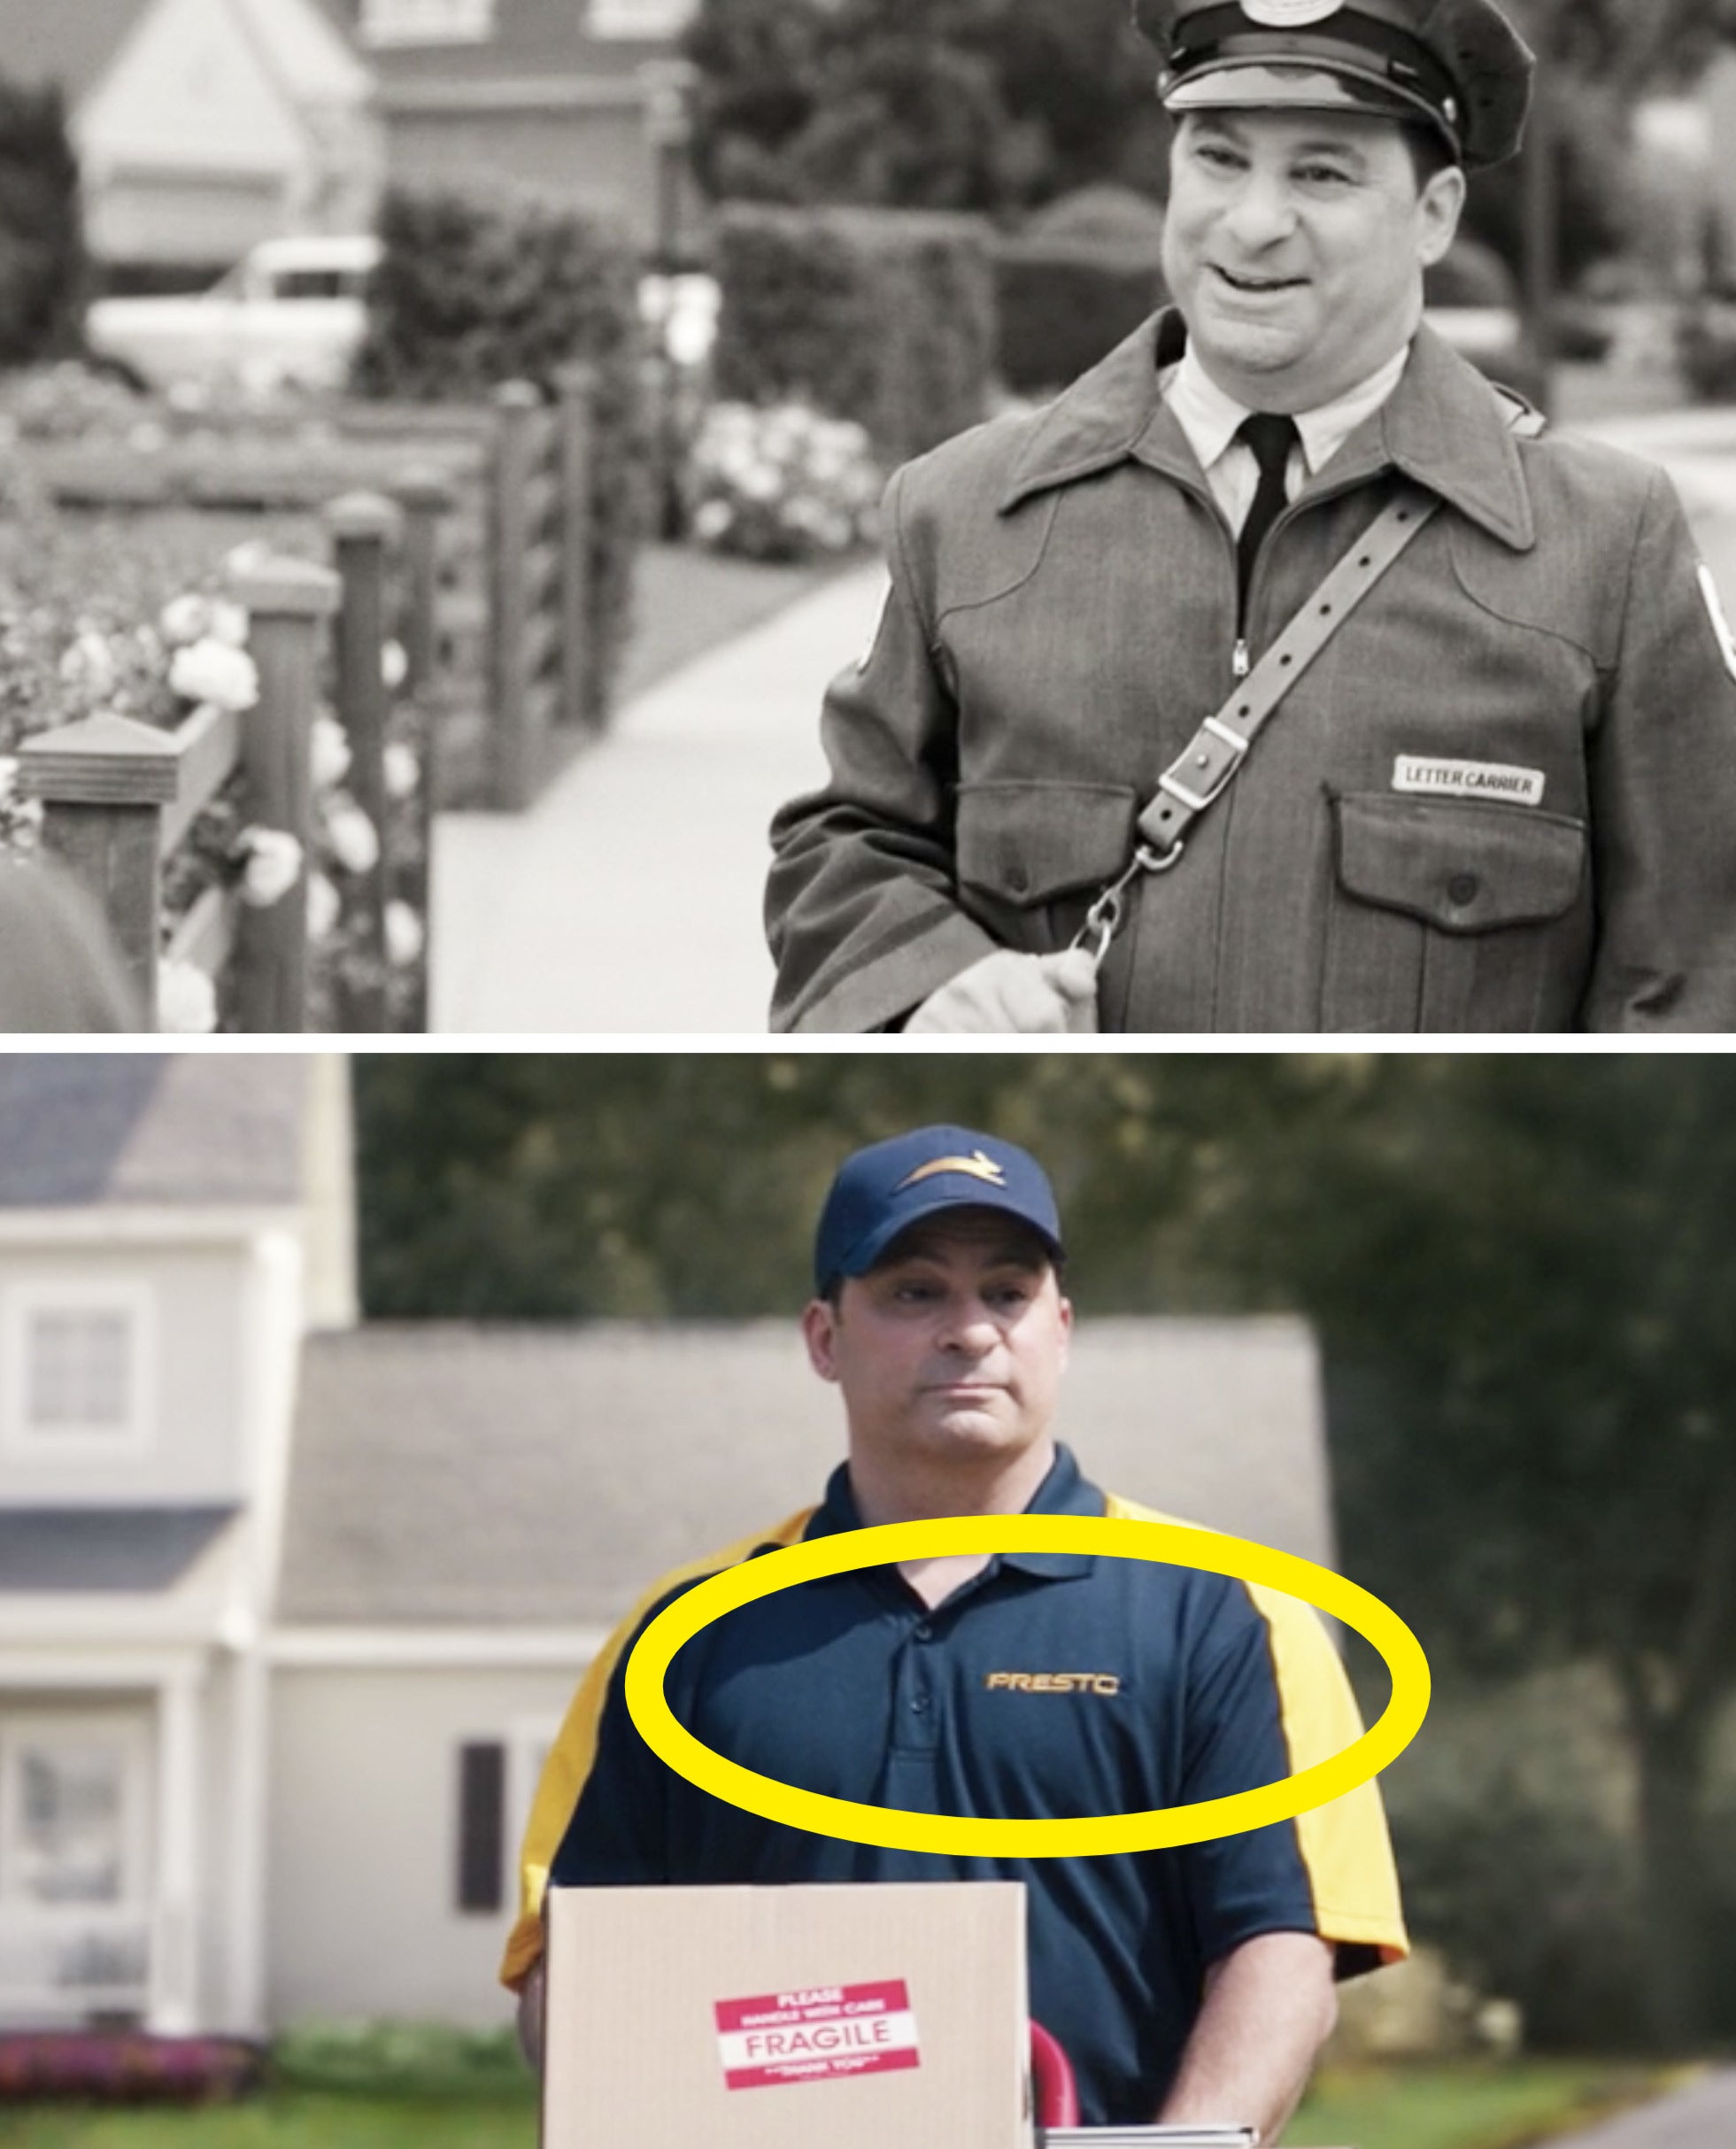 The mailman from Episode 1 vs. the delivery guy wearing a &quot;Presto&quot; shirt in Episode 7